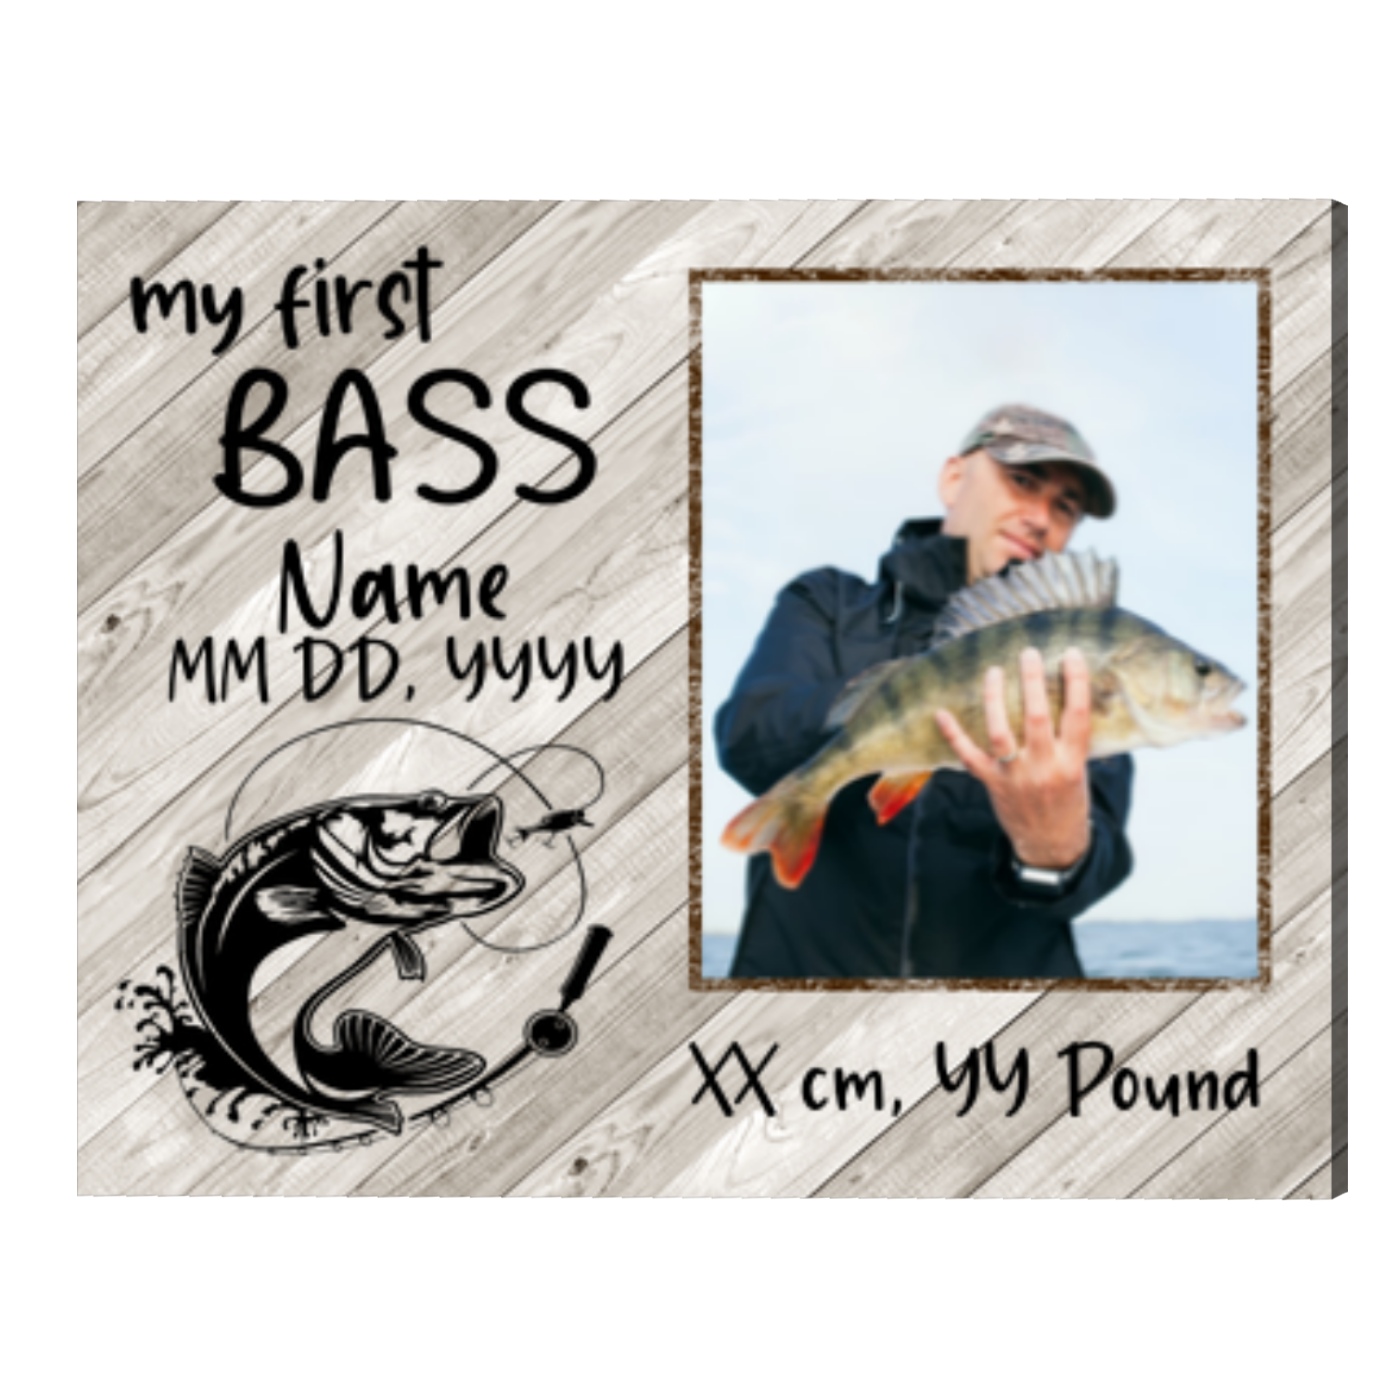 Fishing You A Happy Father's Day 2021 Bass Sticker for Sale by Parkerzz